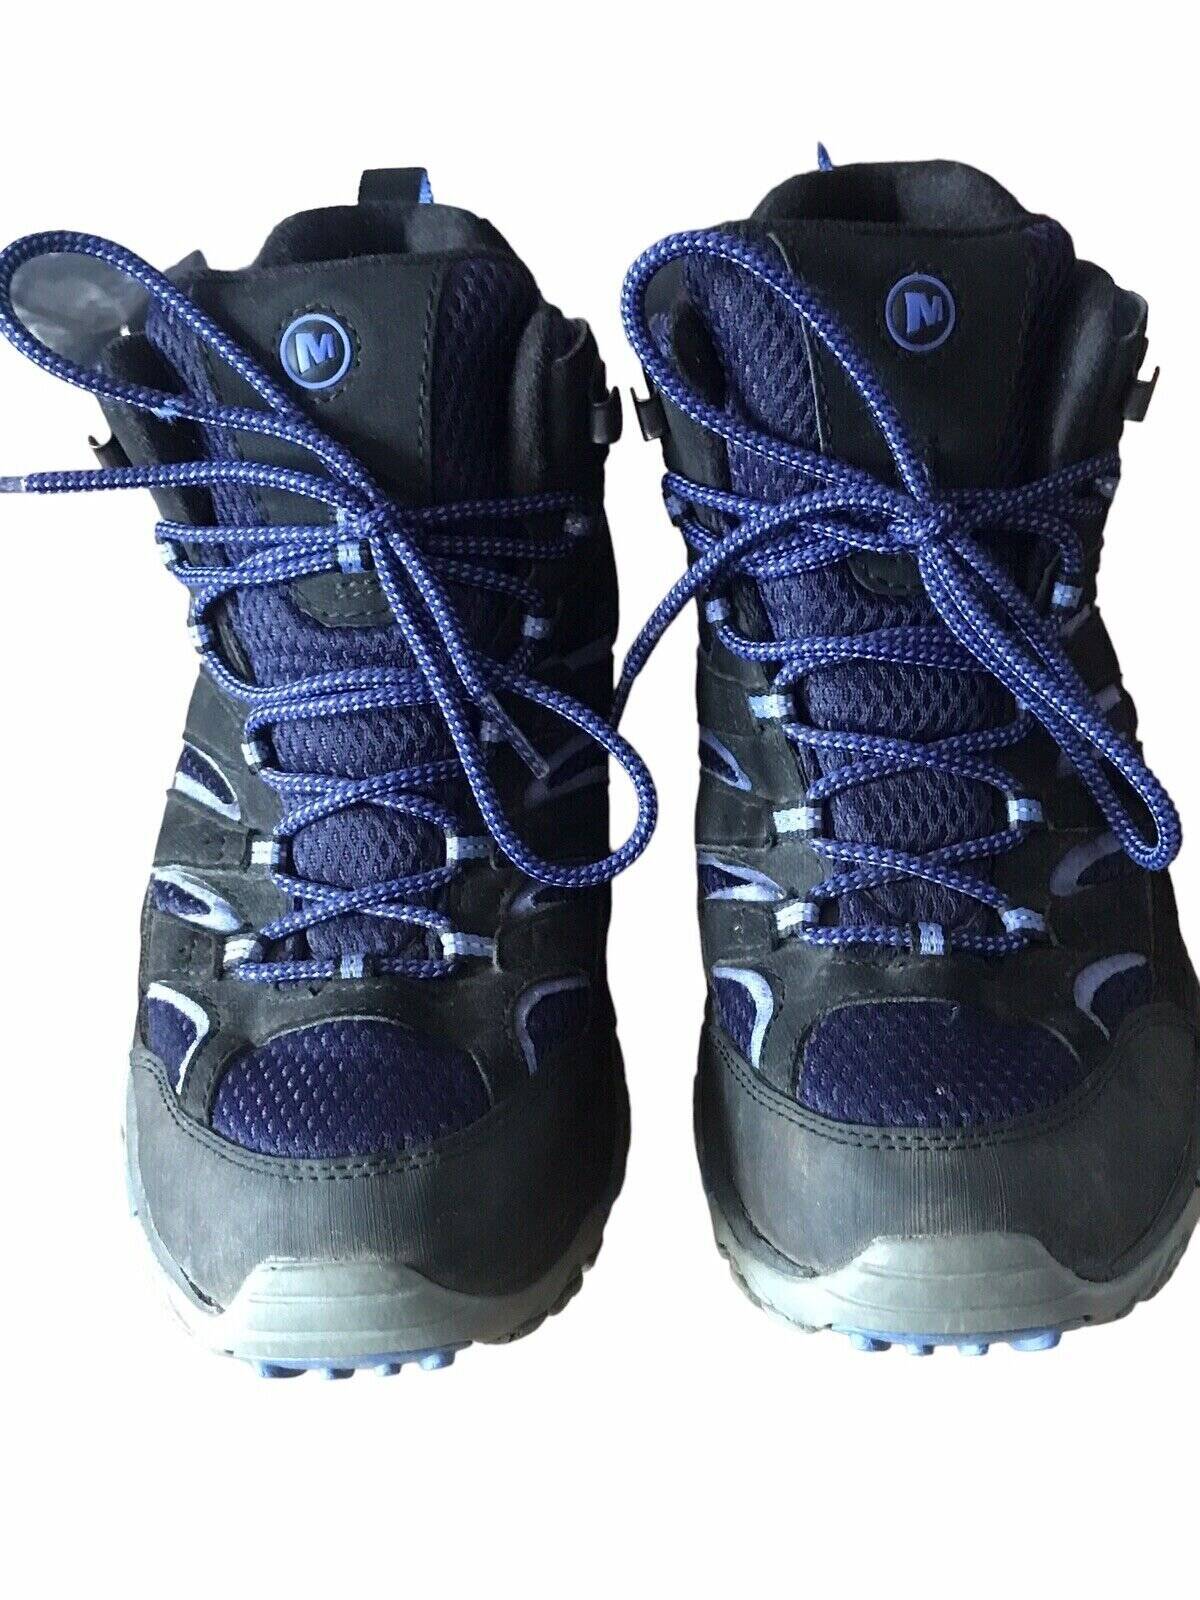 How Long should Hiking Boots Laces be